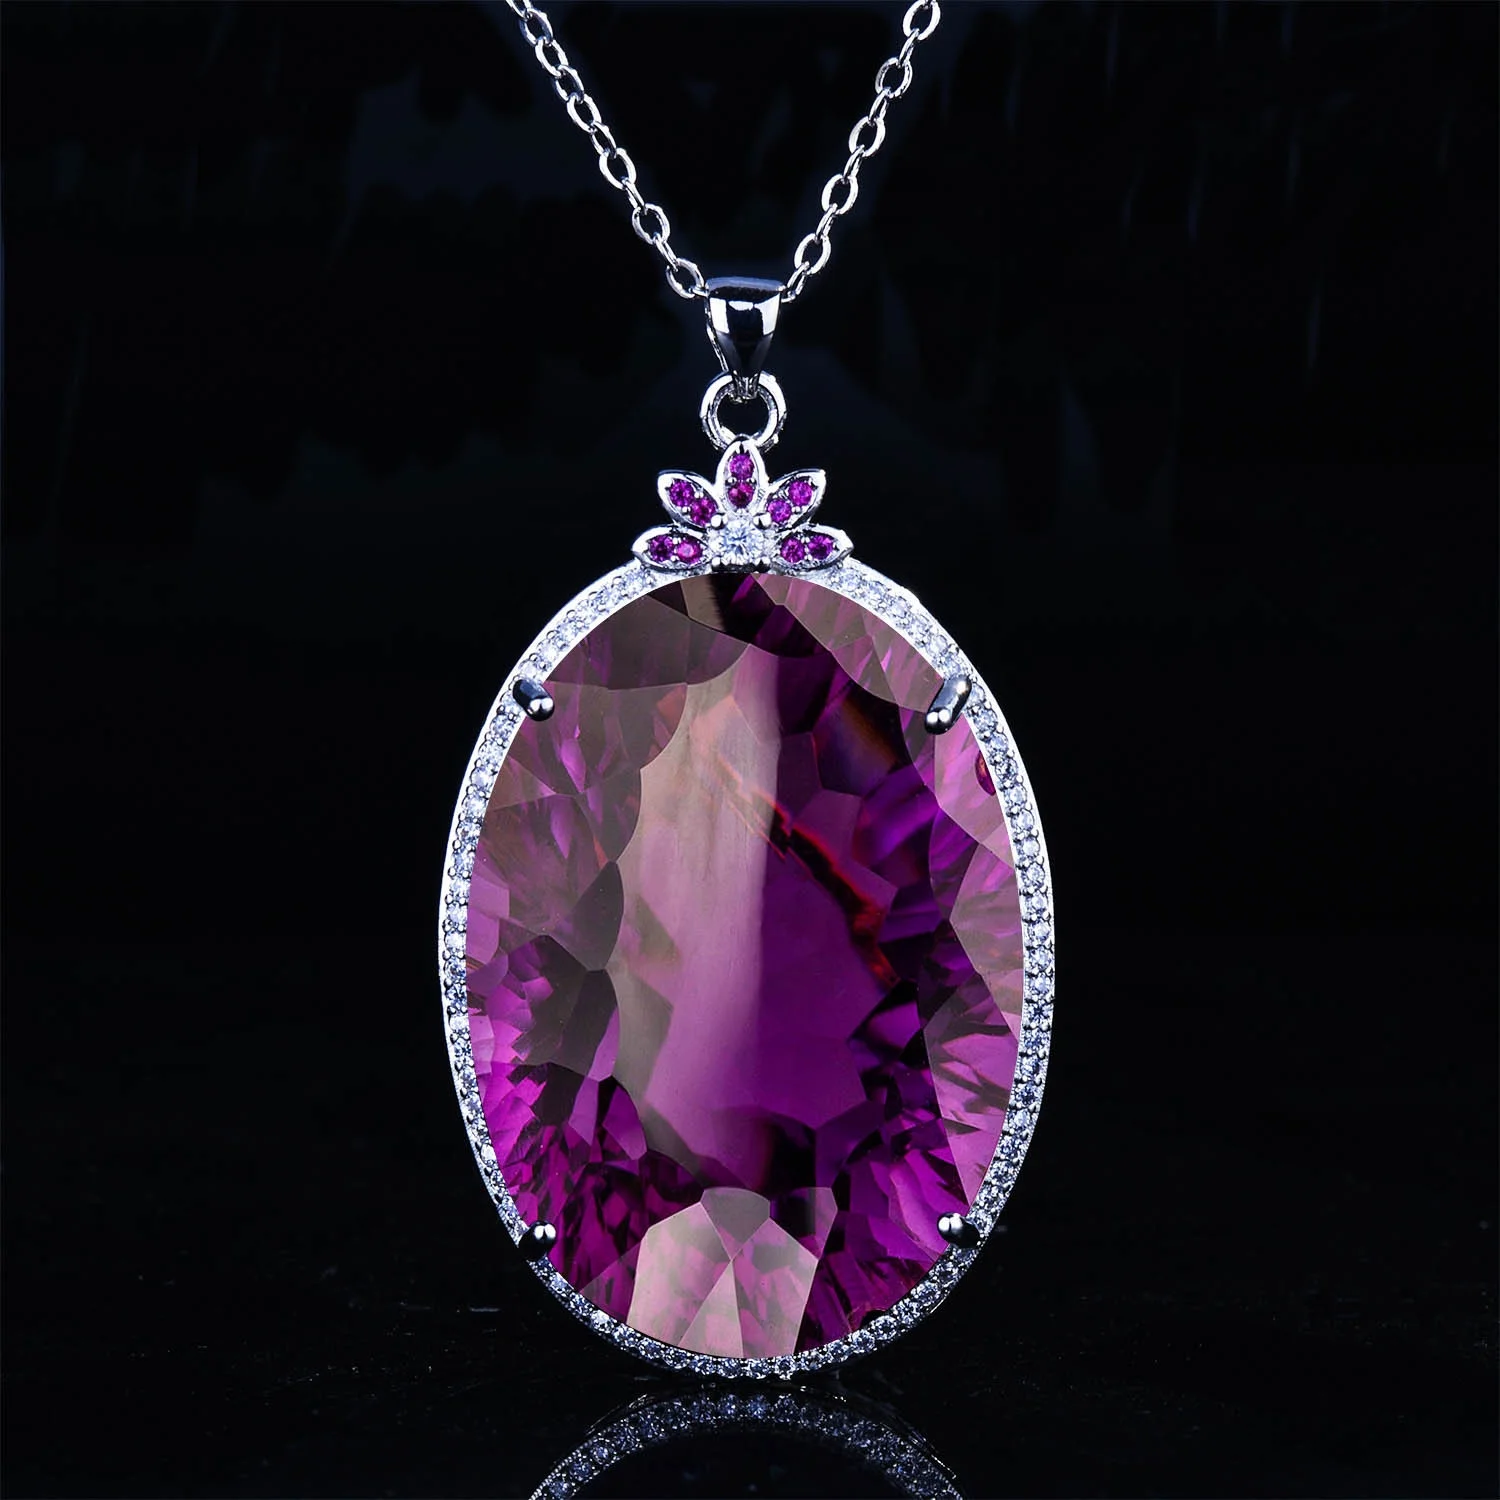 

Luxury Jewelry Inlay Purple Crystal Cubic Zircon Oval Pendant Necklace Women Wedding Engagement Exquisite Accessories Choker, Picture shows